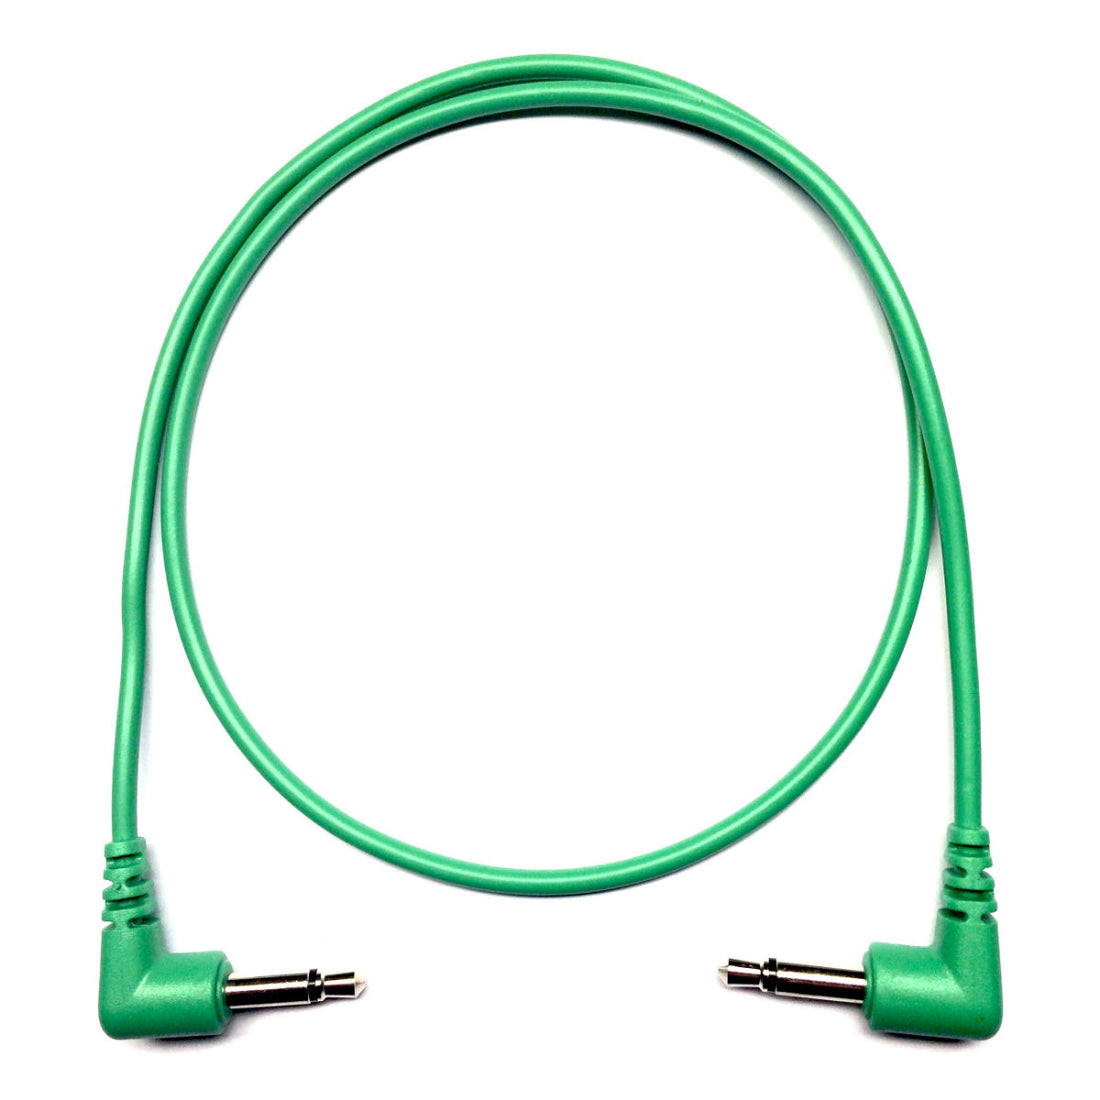 Patch Cable - Emerald 45cm (6 Pack)